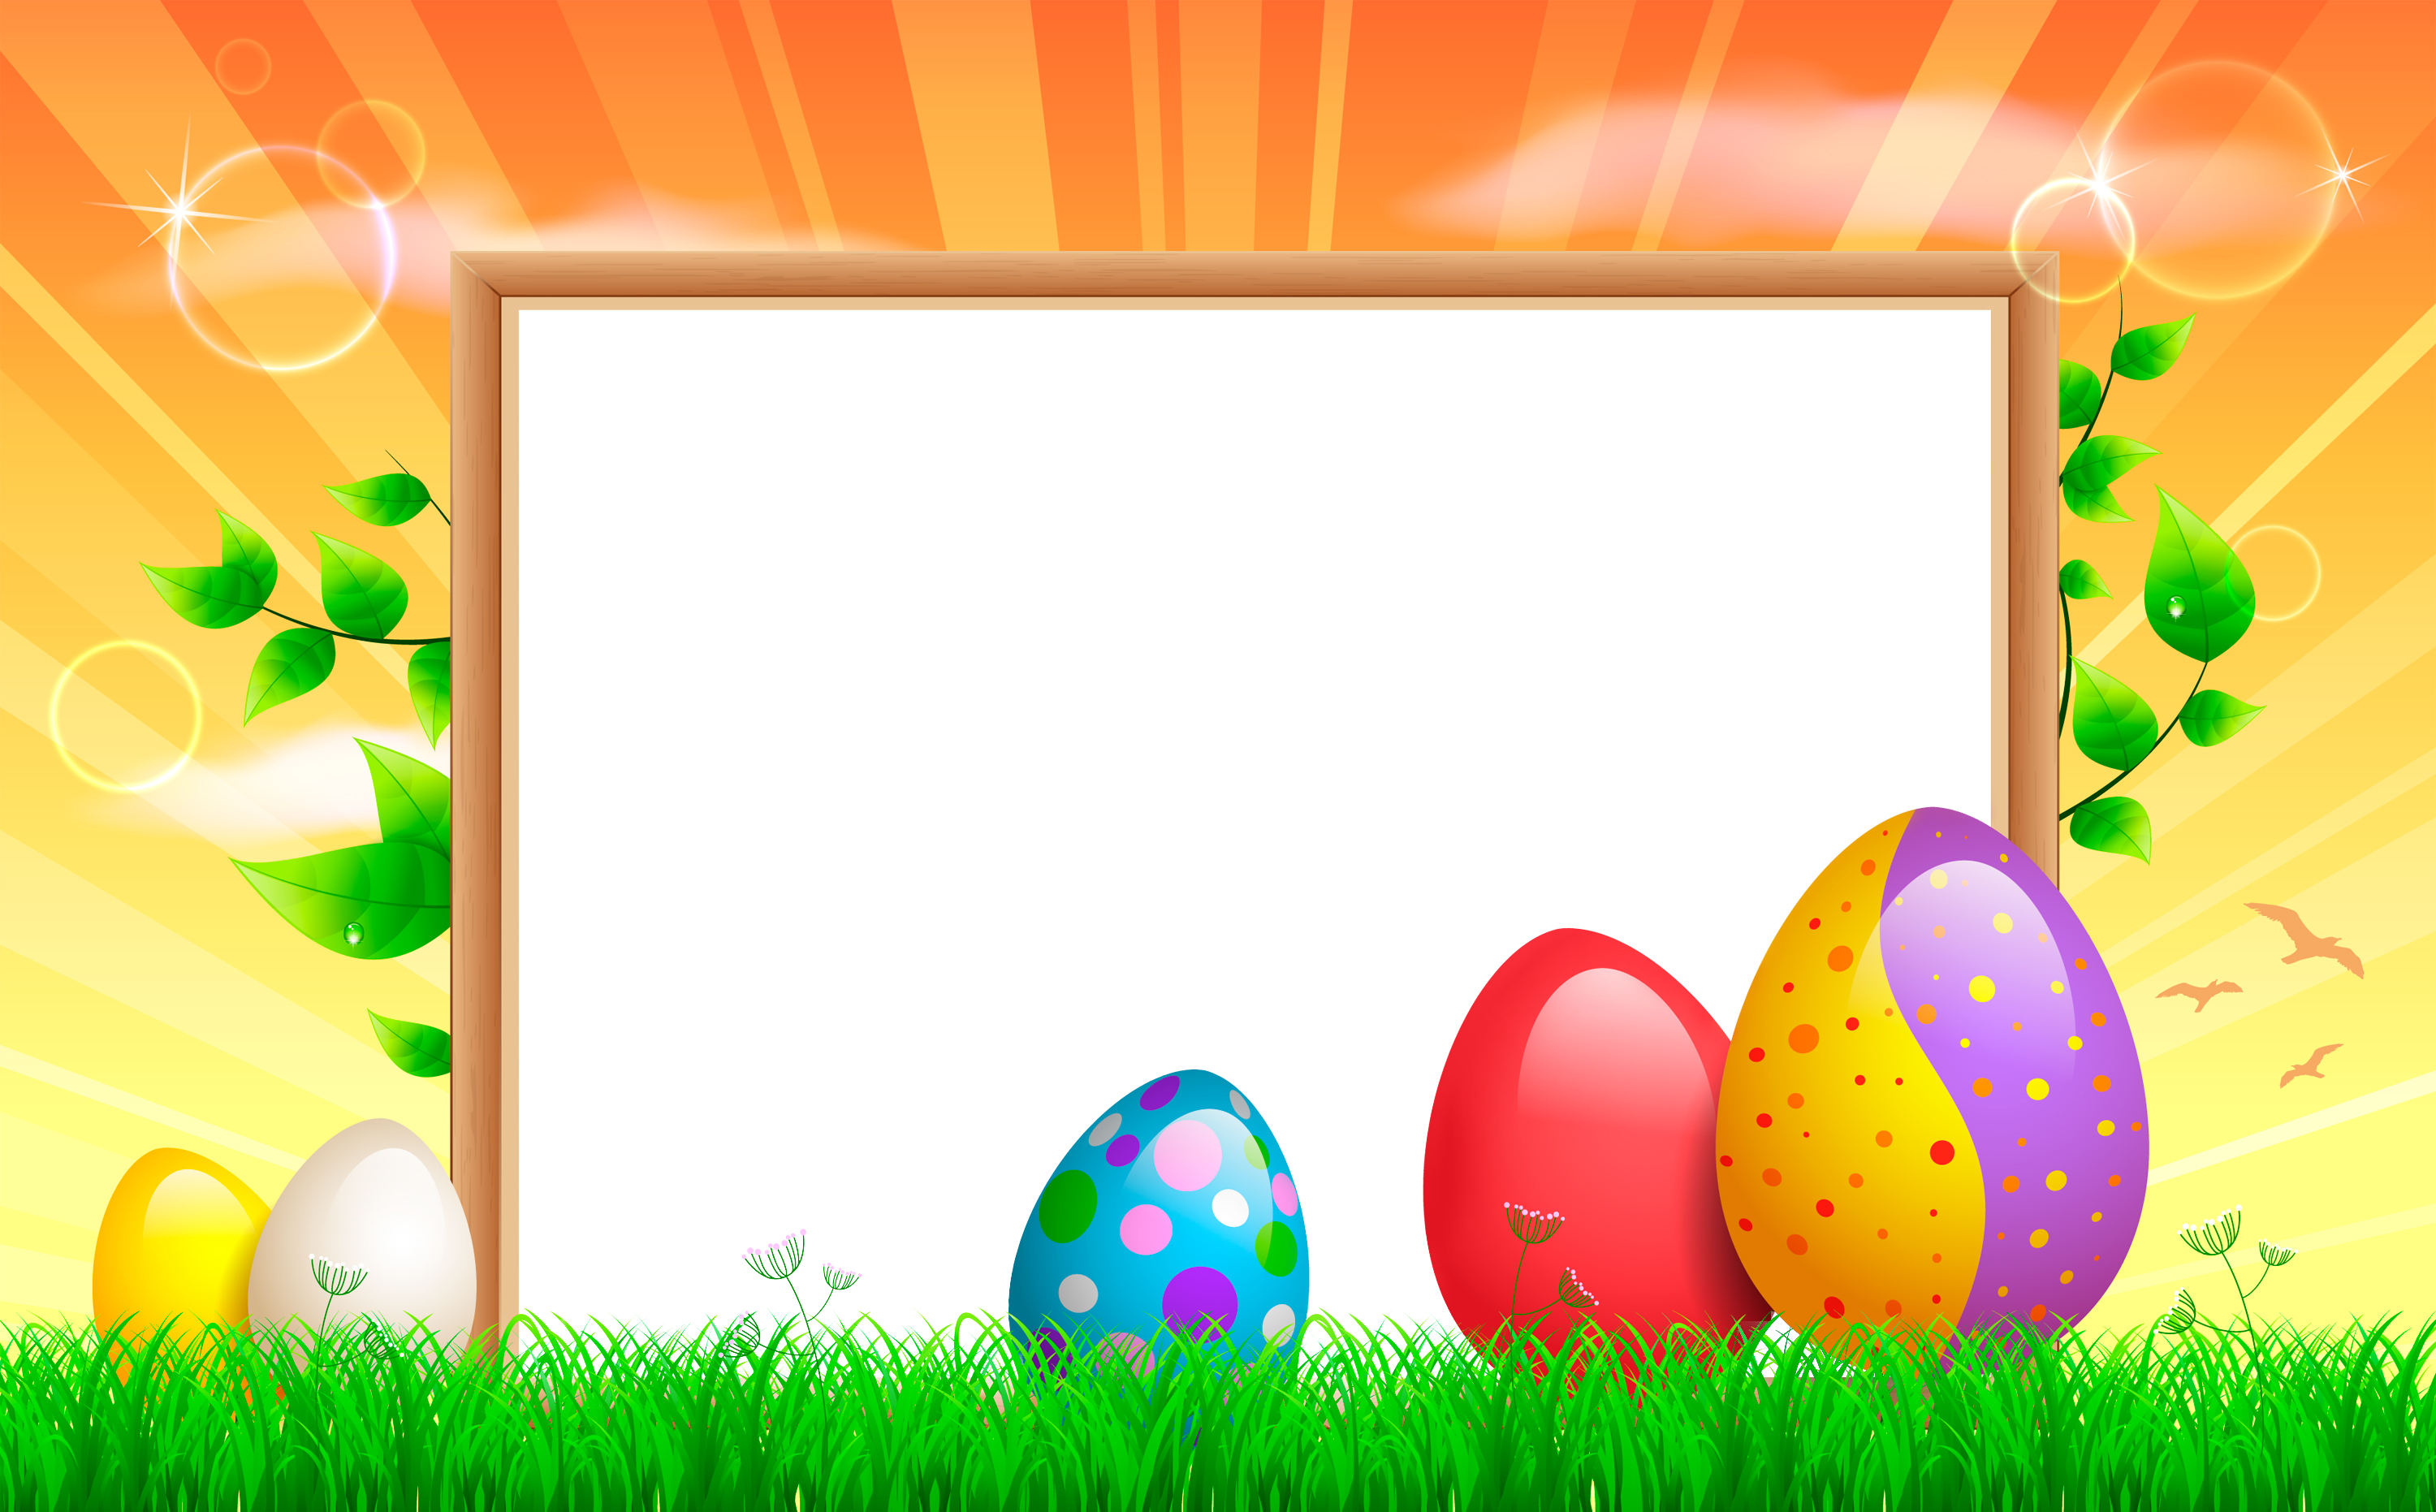 Easter frames free download 11th physics sura guide pdf download 2022